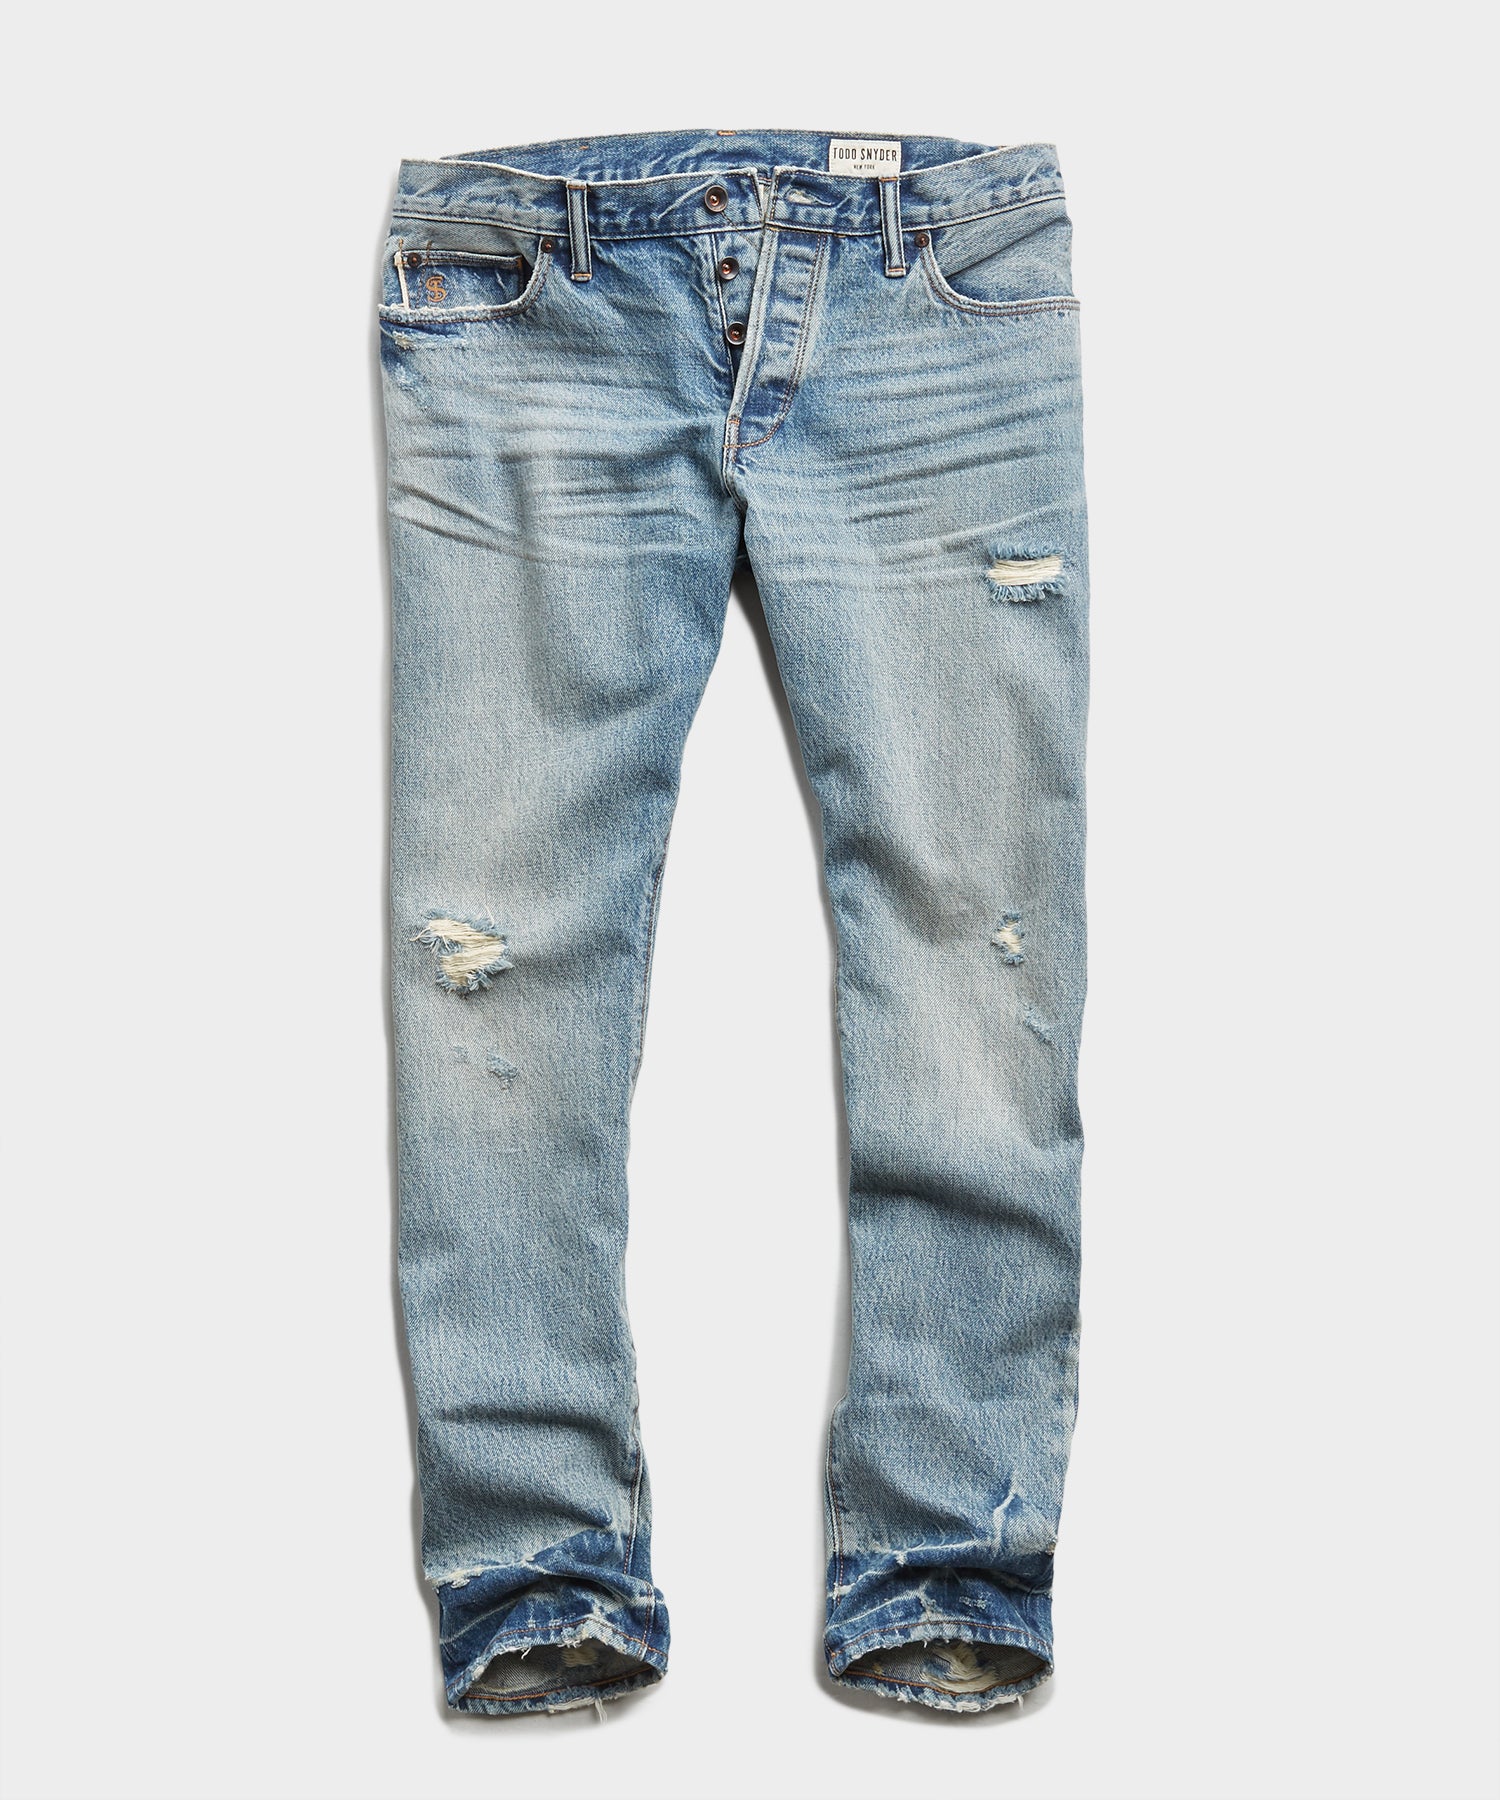 Image of Slim Fit Japanese Selvedge Jean in New Distressed Wash